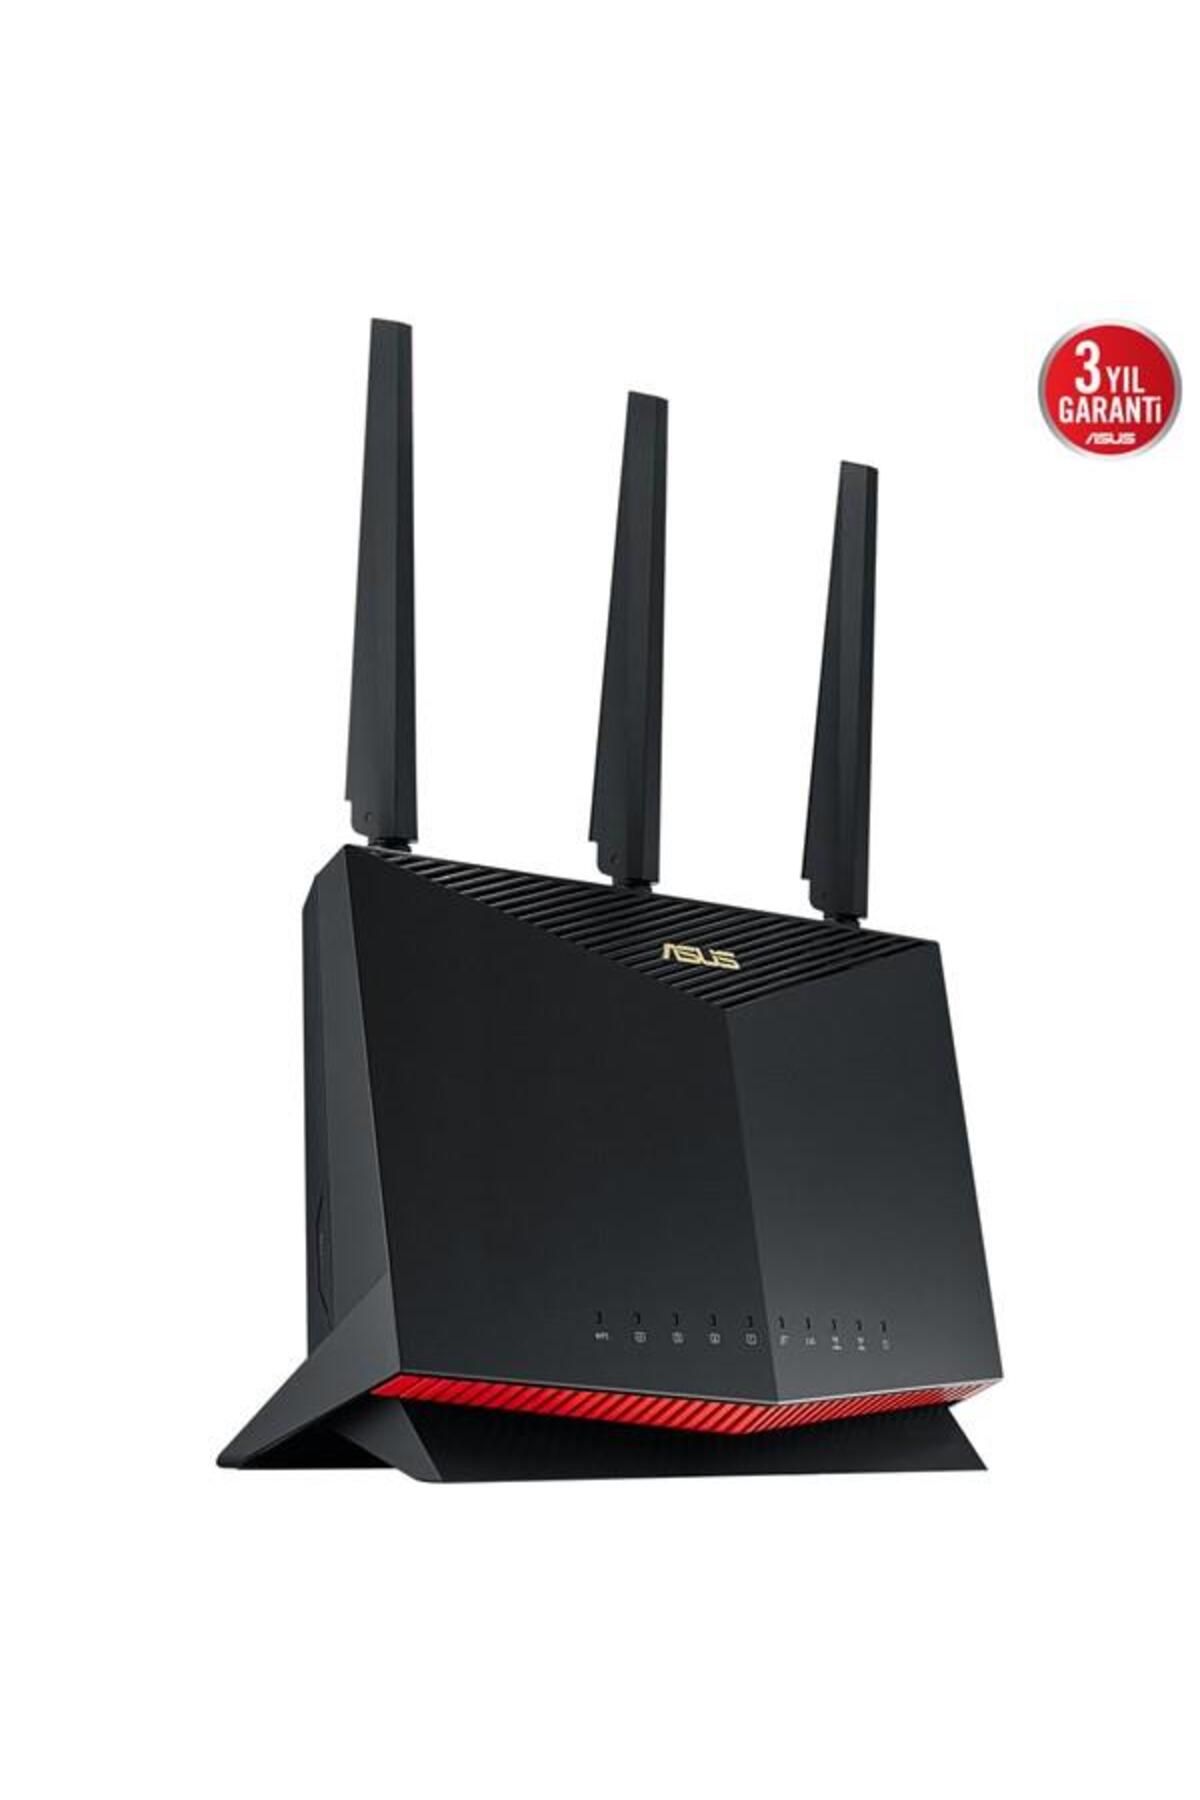 ASUS Rt-ax86u Pro 5700mbps Wifi 6 Router